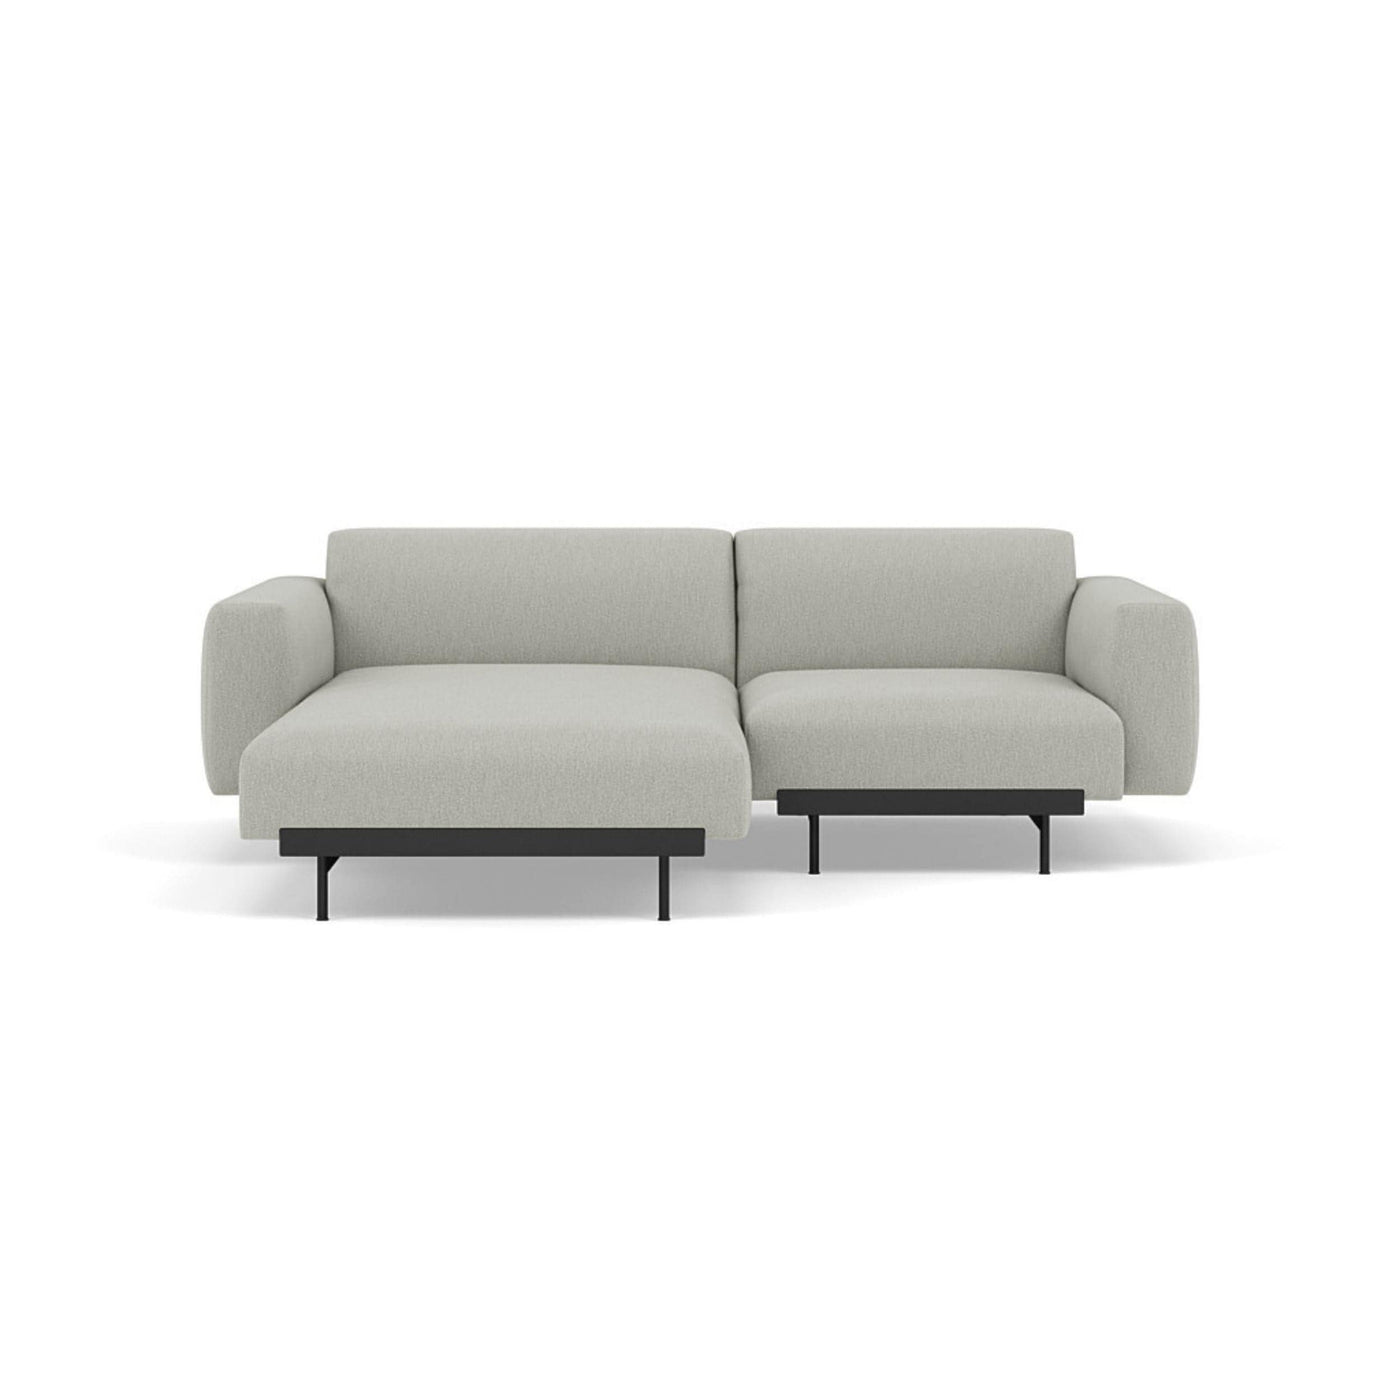 Muuto In Situ Modular 2 Seater Sofa, configuration 5 in clay 12 fabric. Made to order from someday designs #colour_clay-12